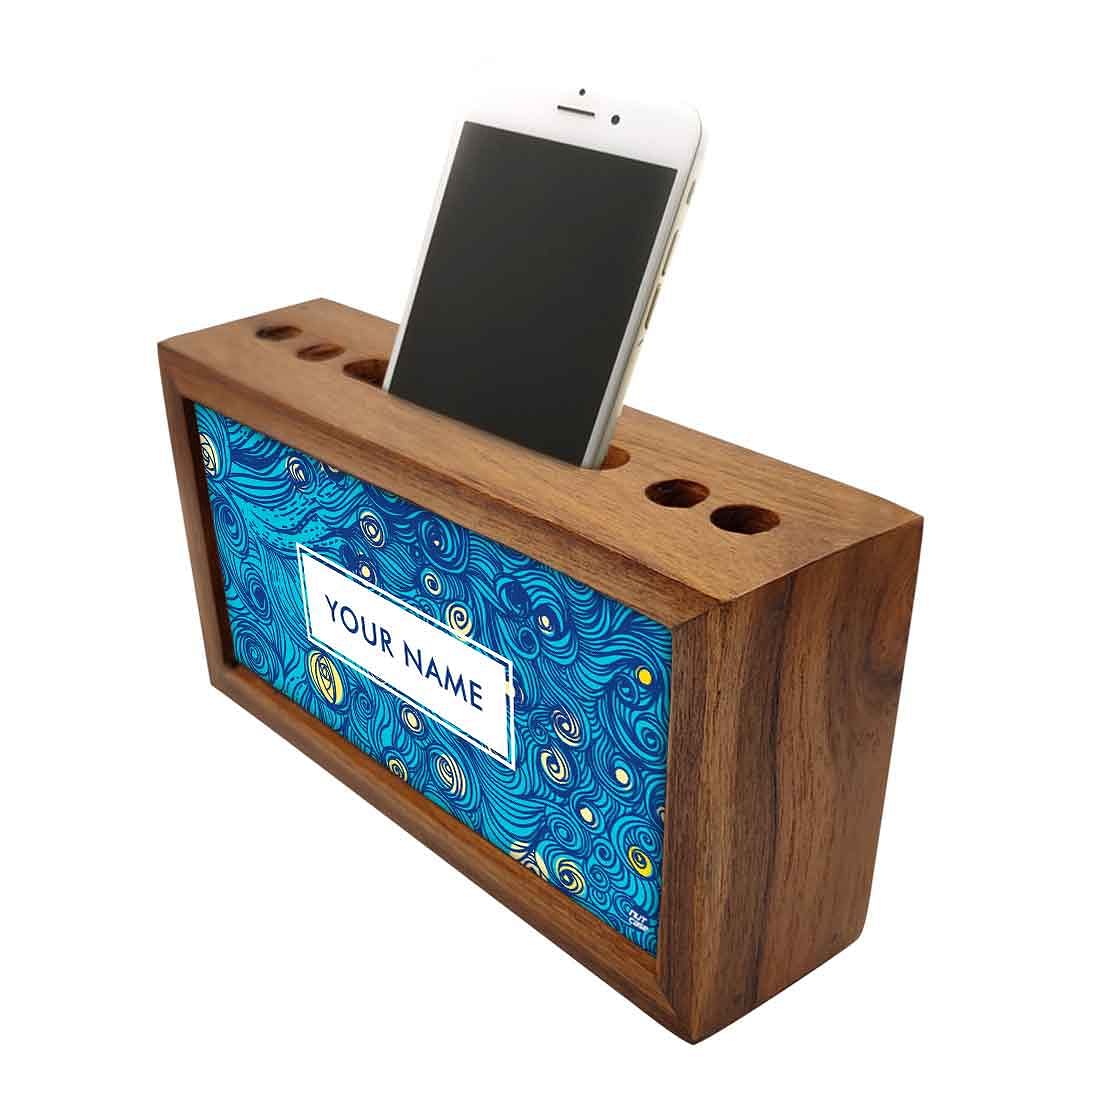 Customized Wooden Pen Stand for Office - Starry Starry Night Nutcase